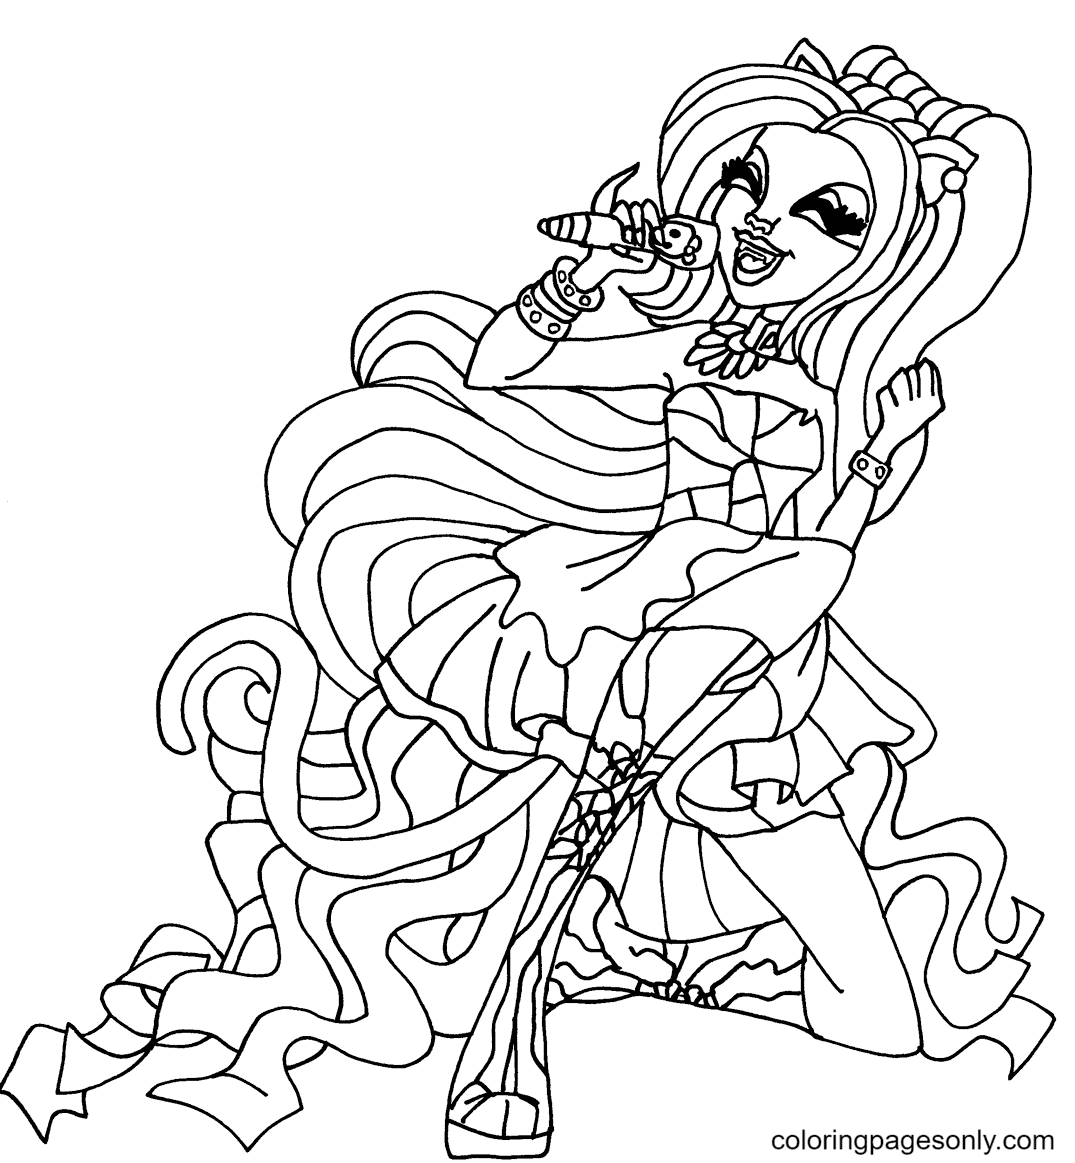 Catty Noir Coloring Page